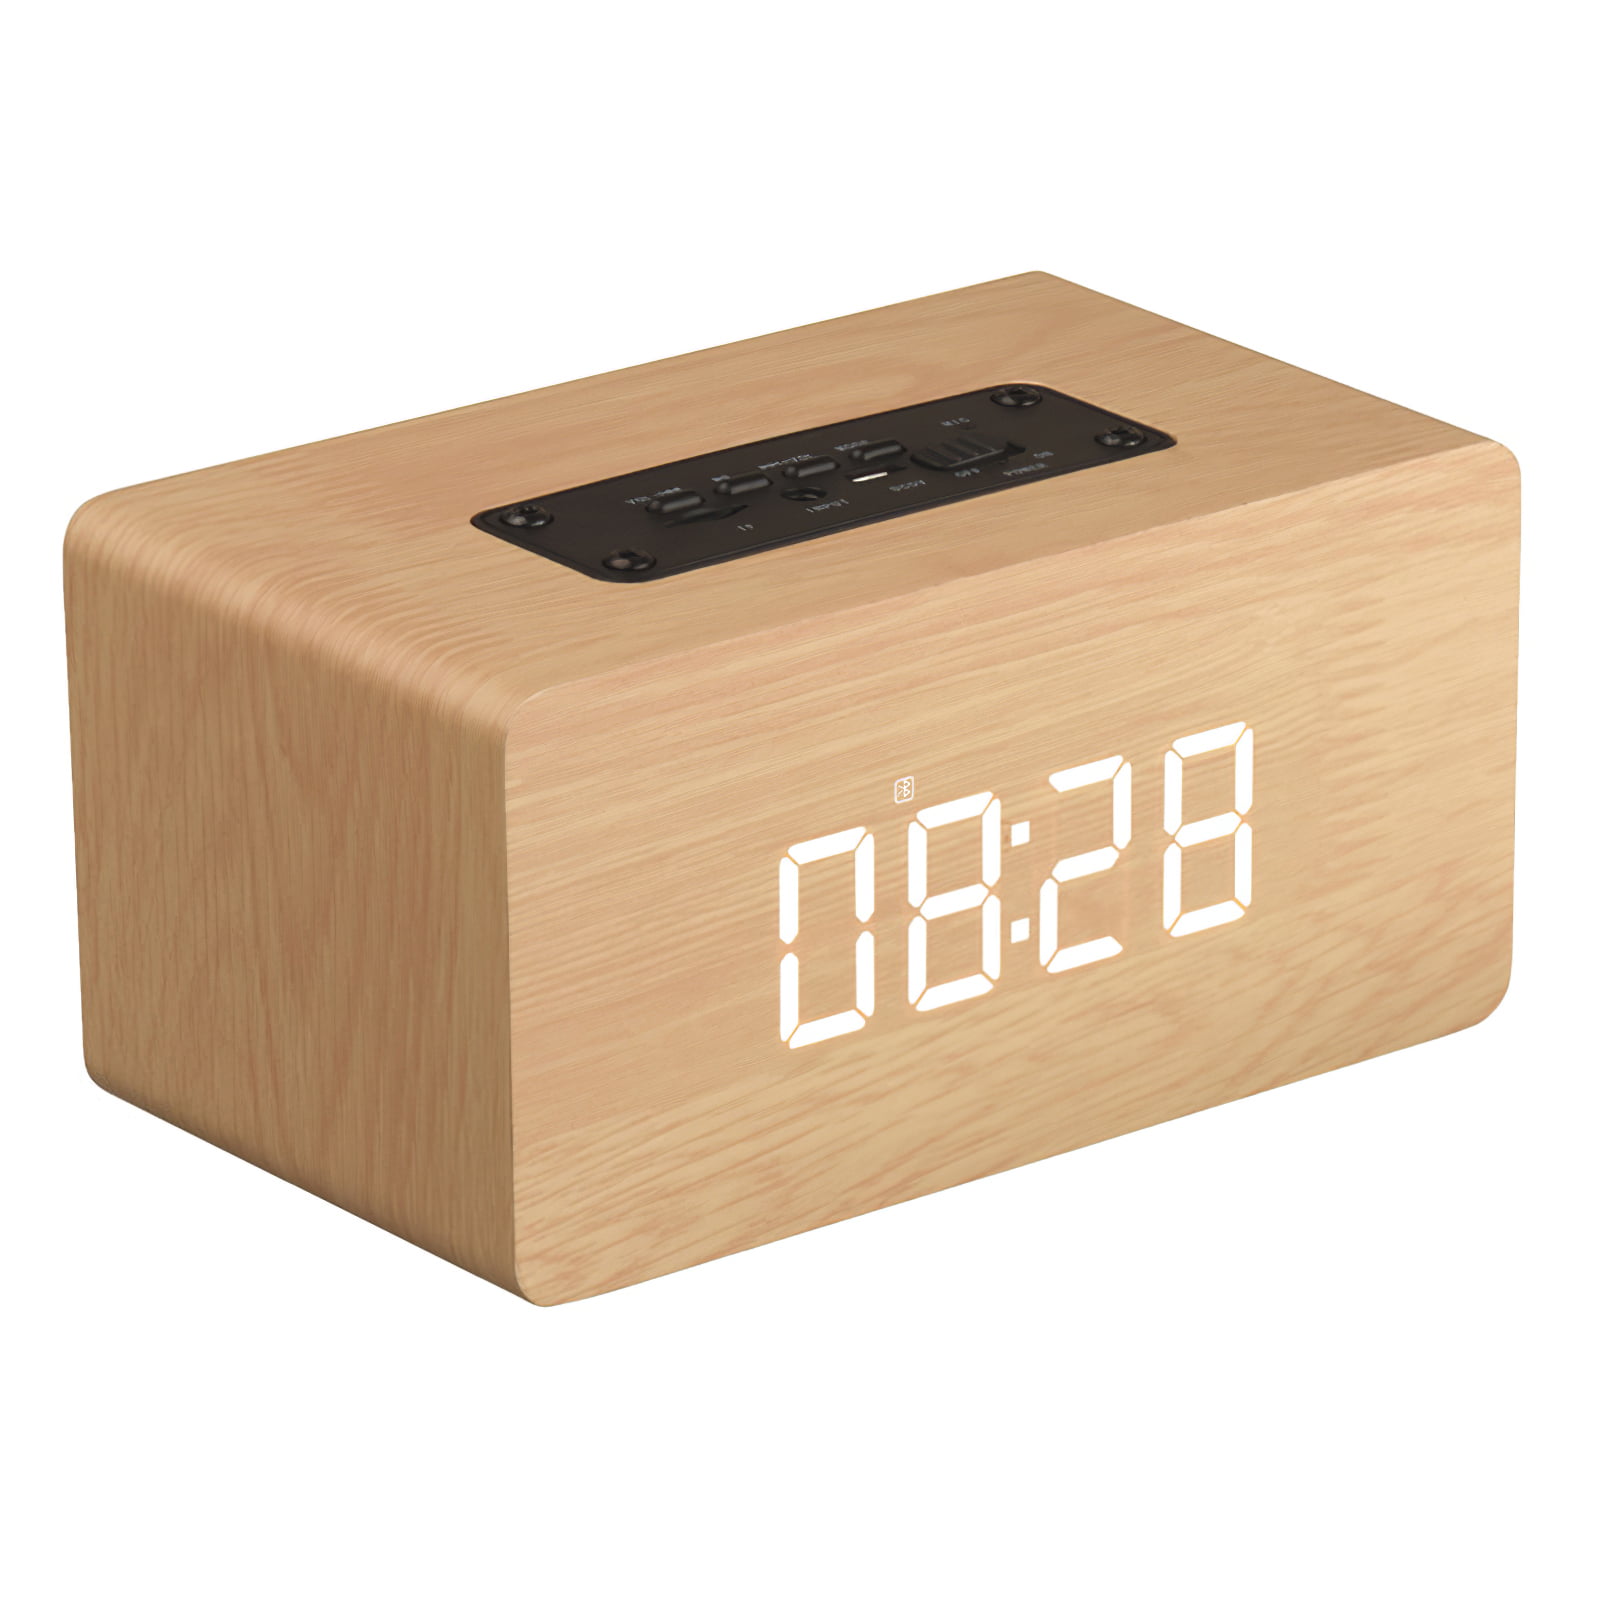 Alarm Clock Portable Speaker Digital Stereo Wooden Home Office Bedroom Travel LED Display Rechargeable Removable Backup Battery Time Date Temperature Best Gift Idea